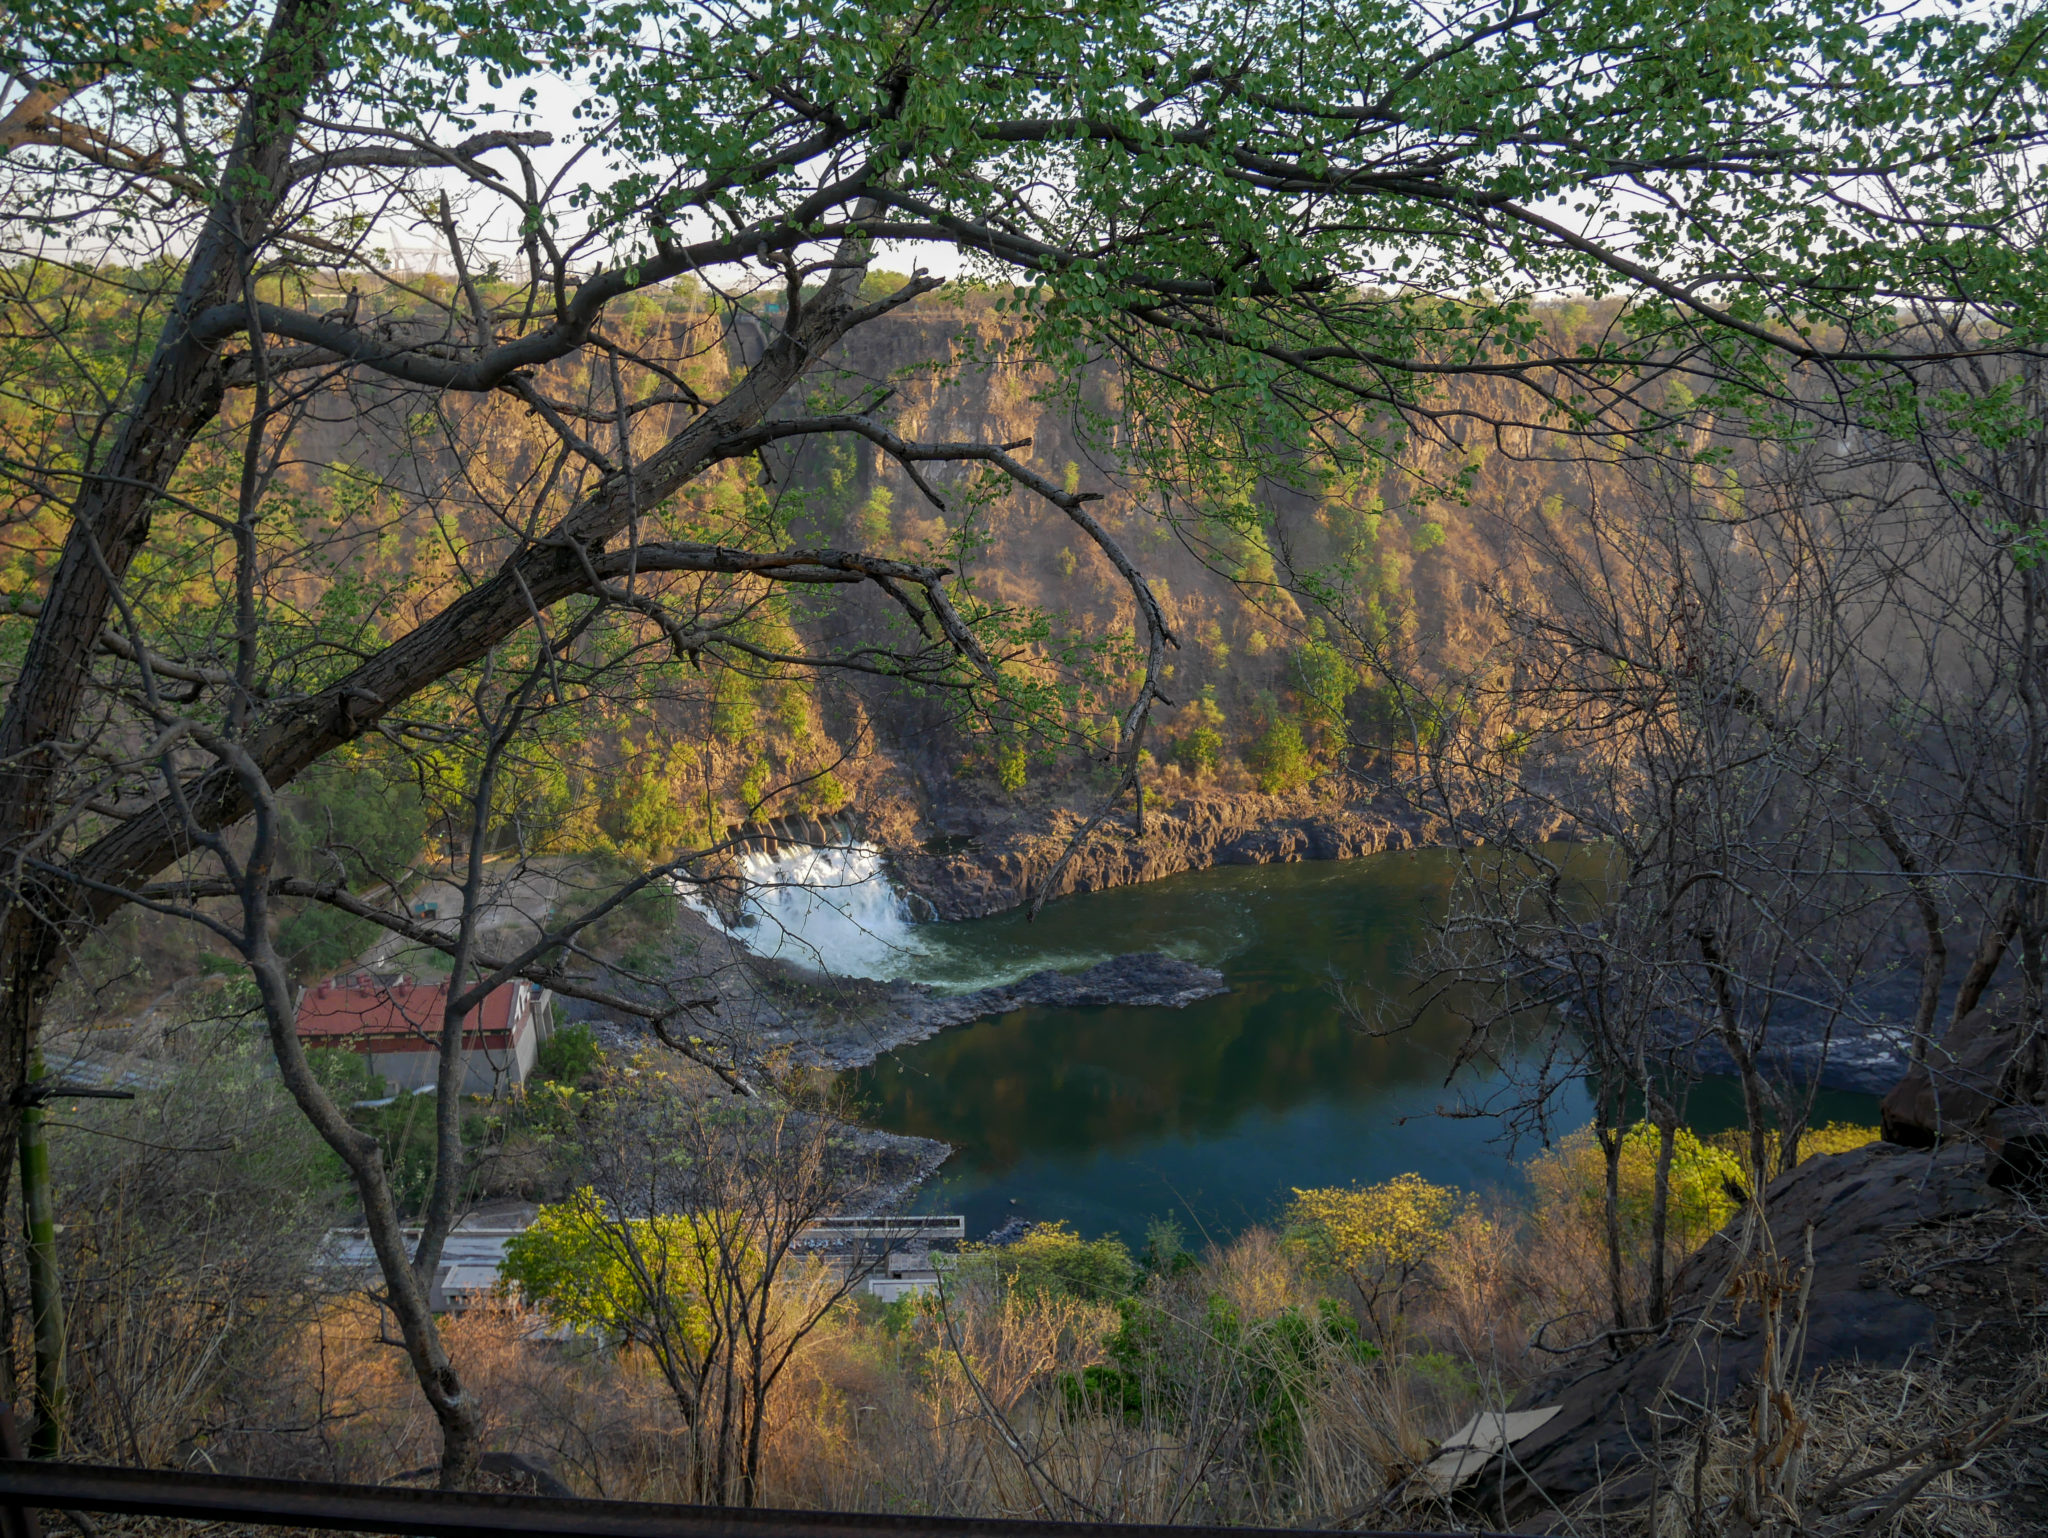 Victoria Falls seen from the Royal Livingstone Express train